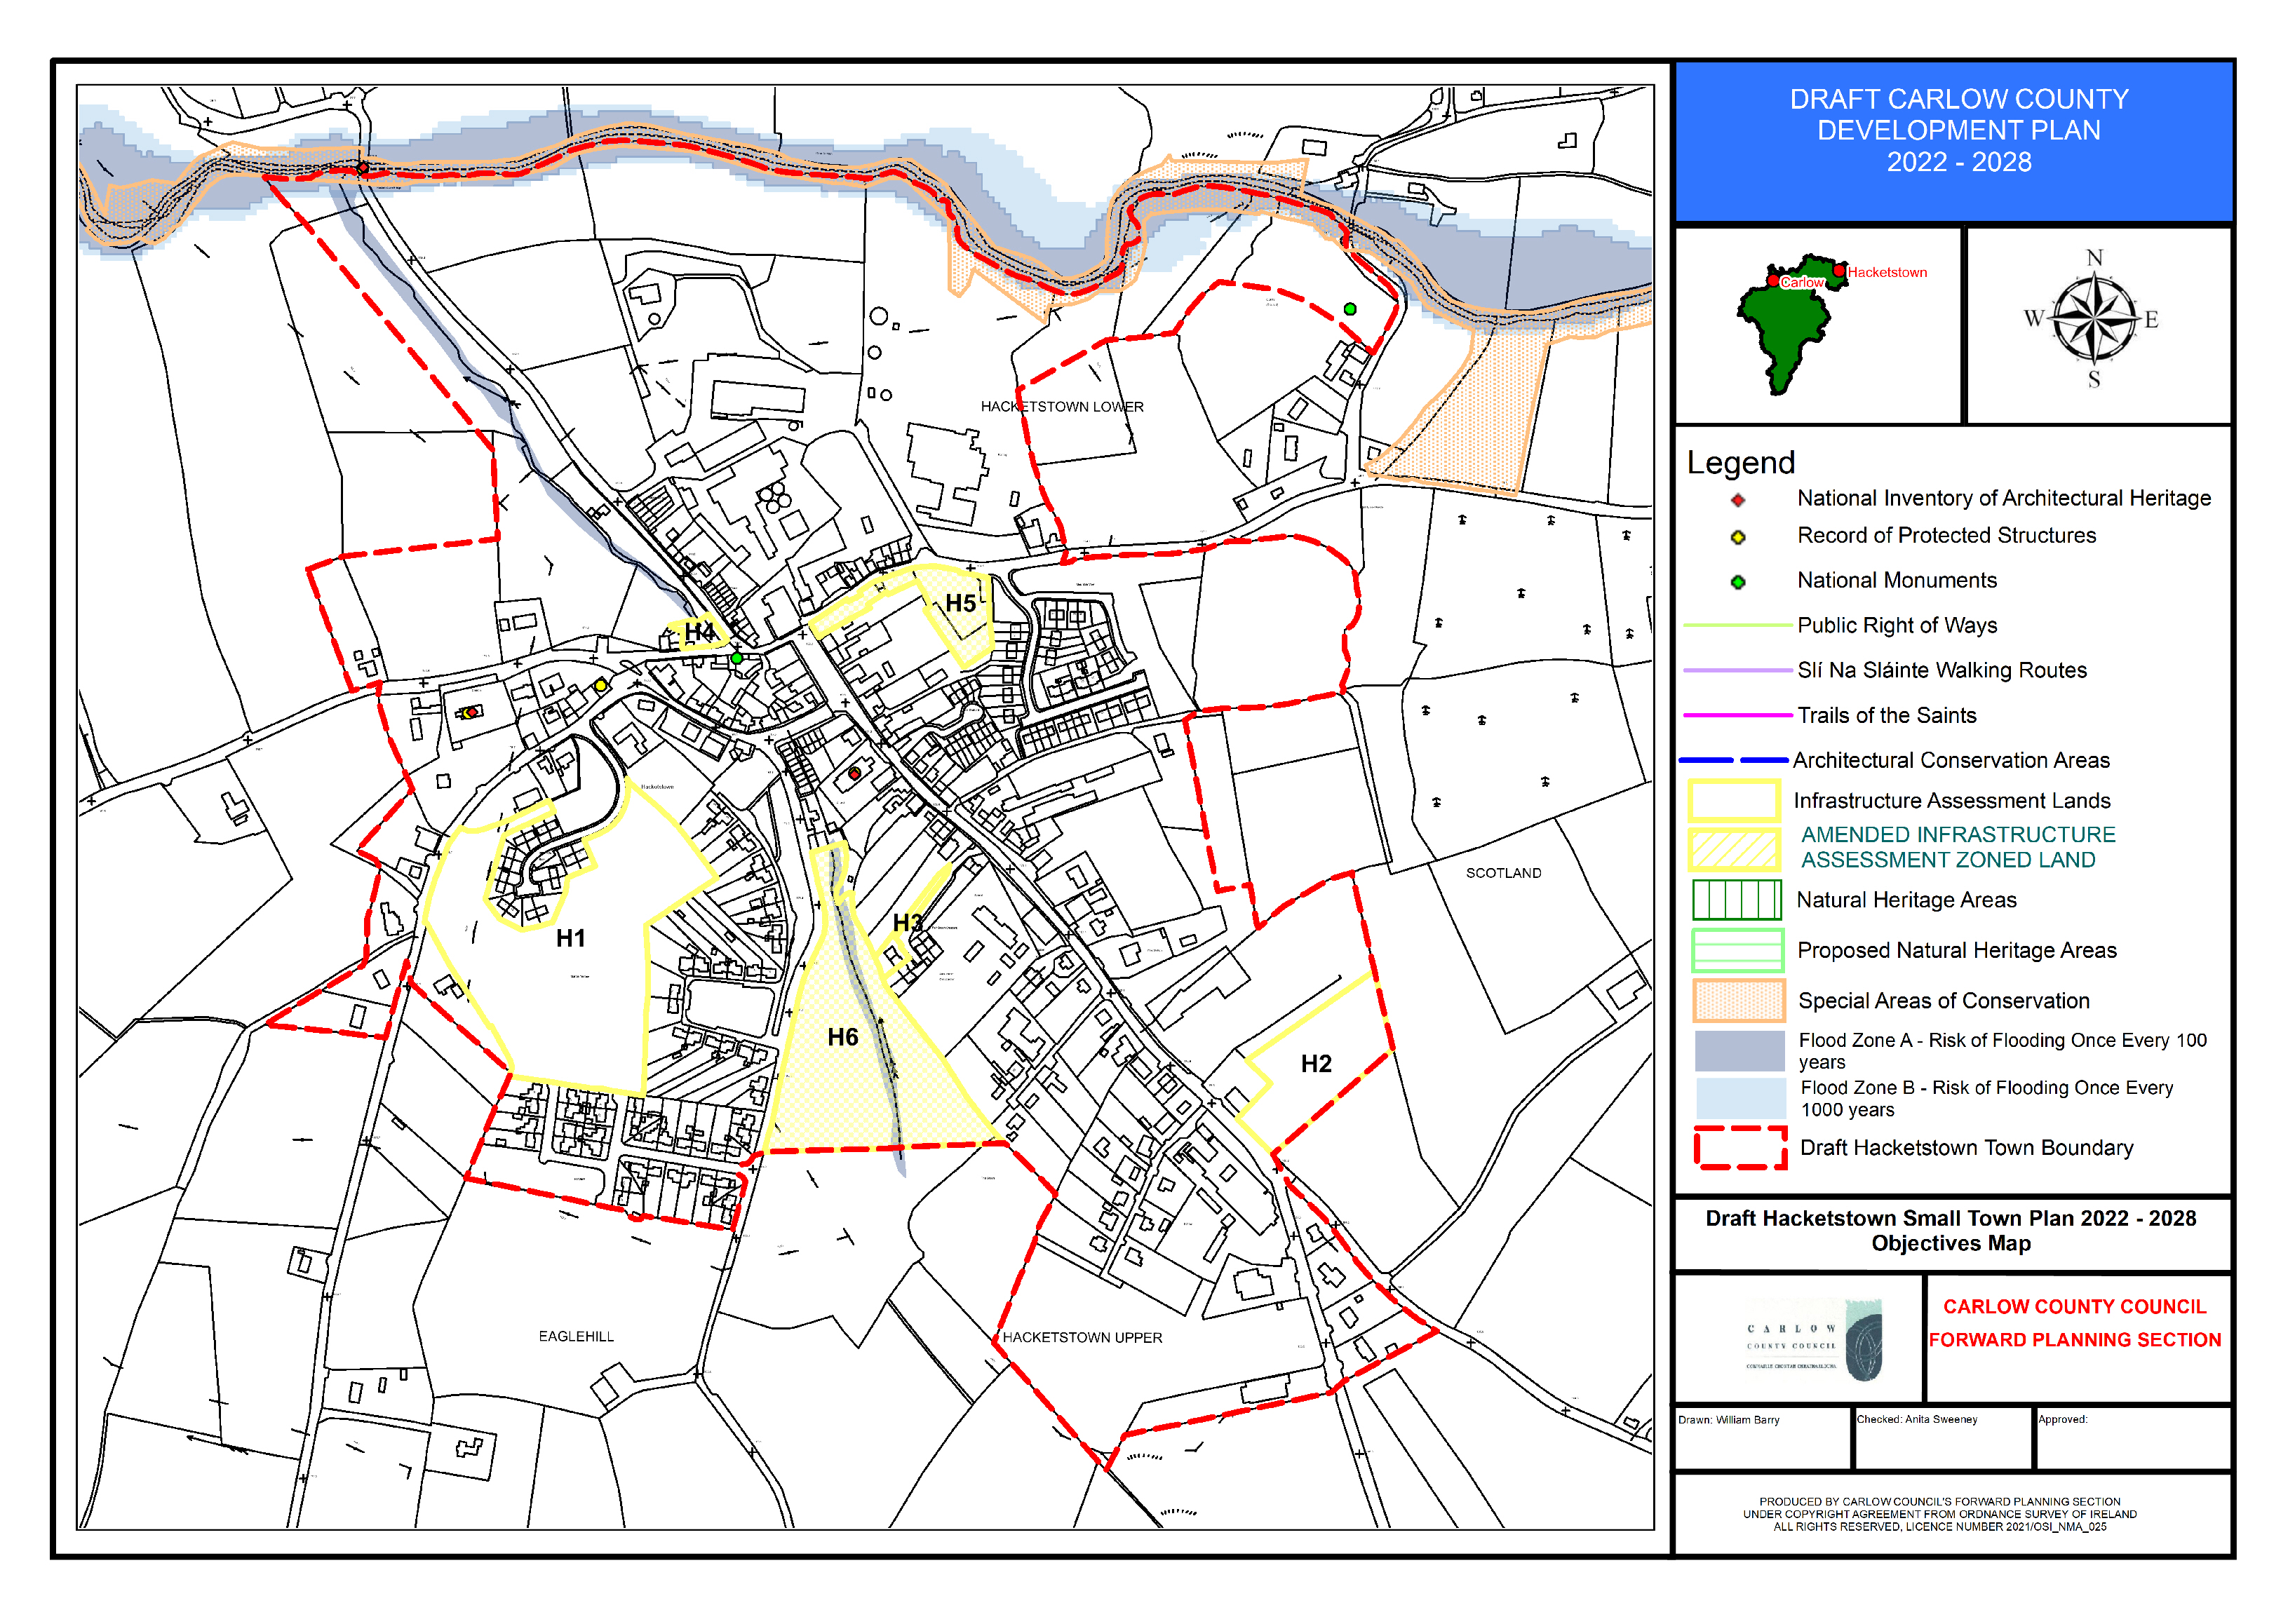 Objectives map: Draft Hacketstown Small Town Plan 2022-2028